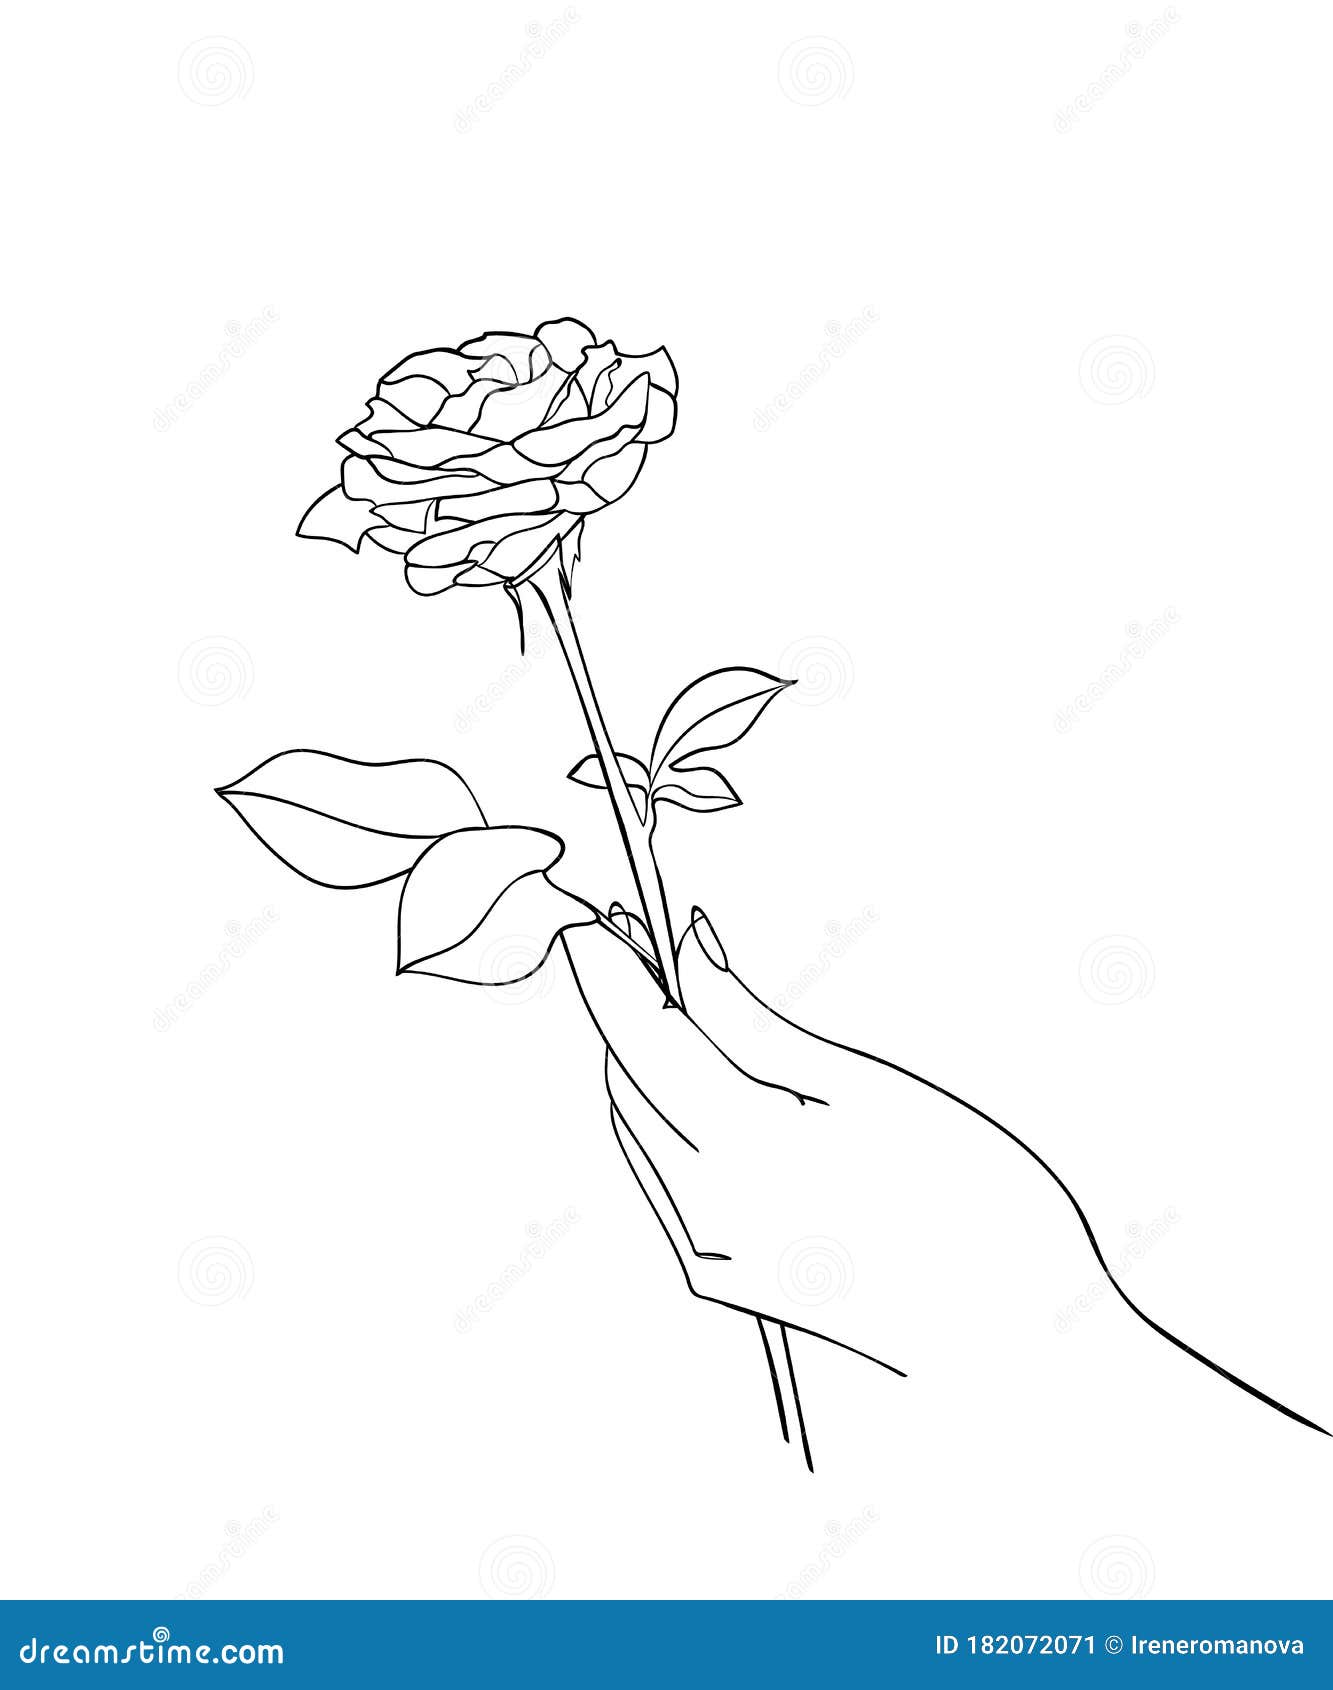 Drawings Of Hands Holding Flowers 53 000 vectors stock photos psd files